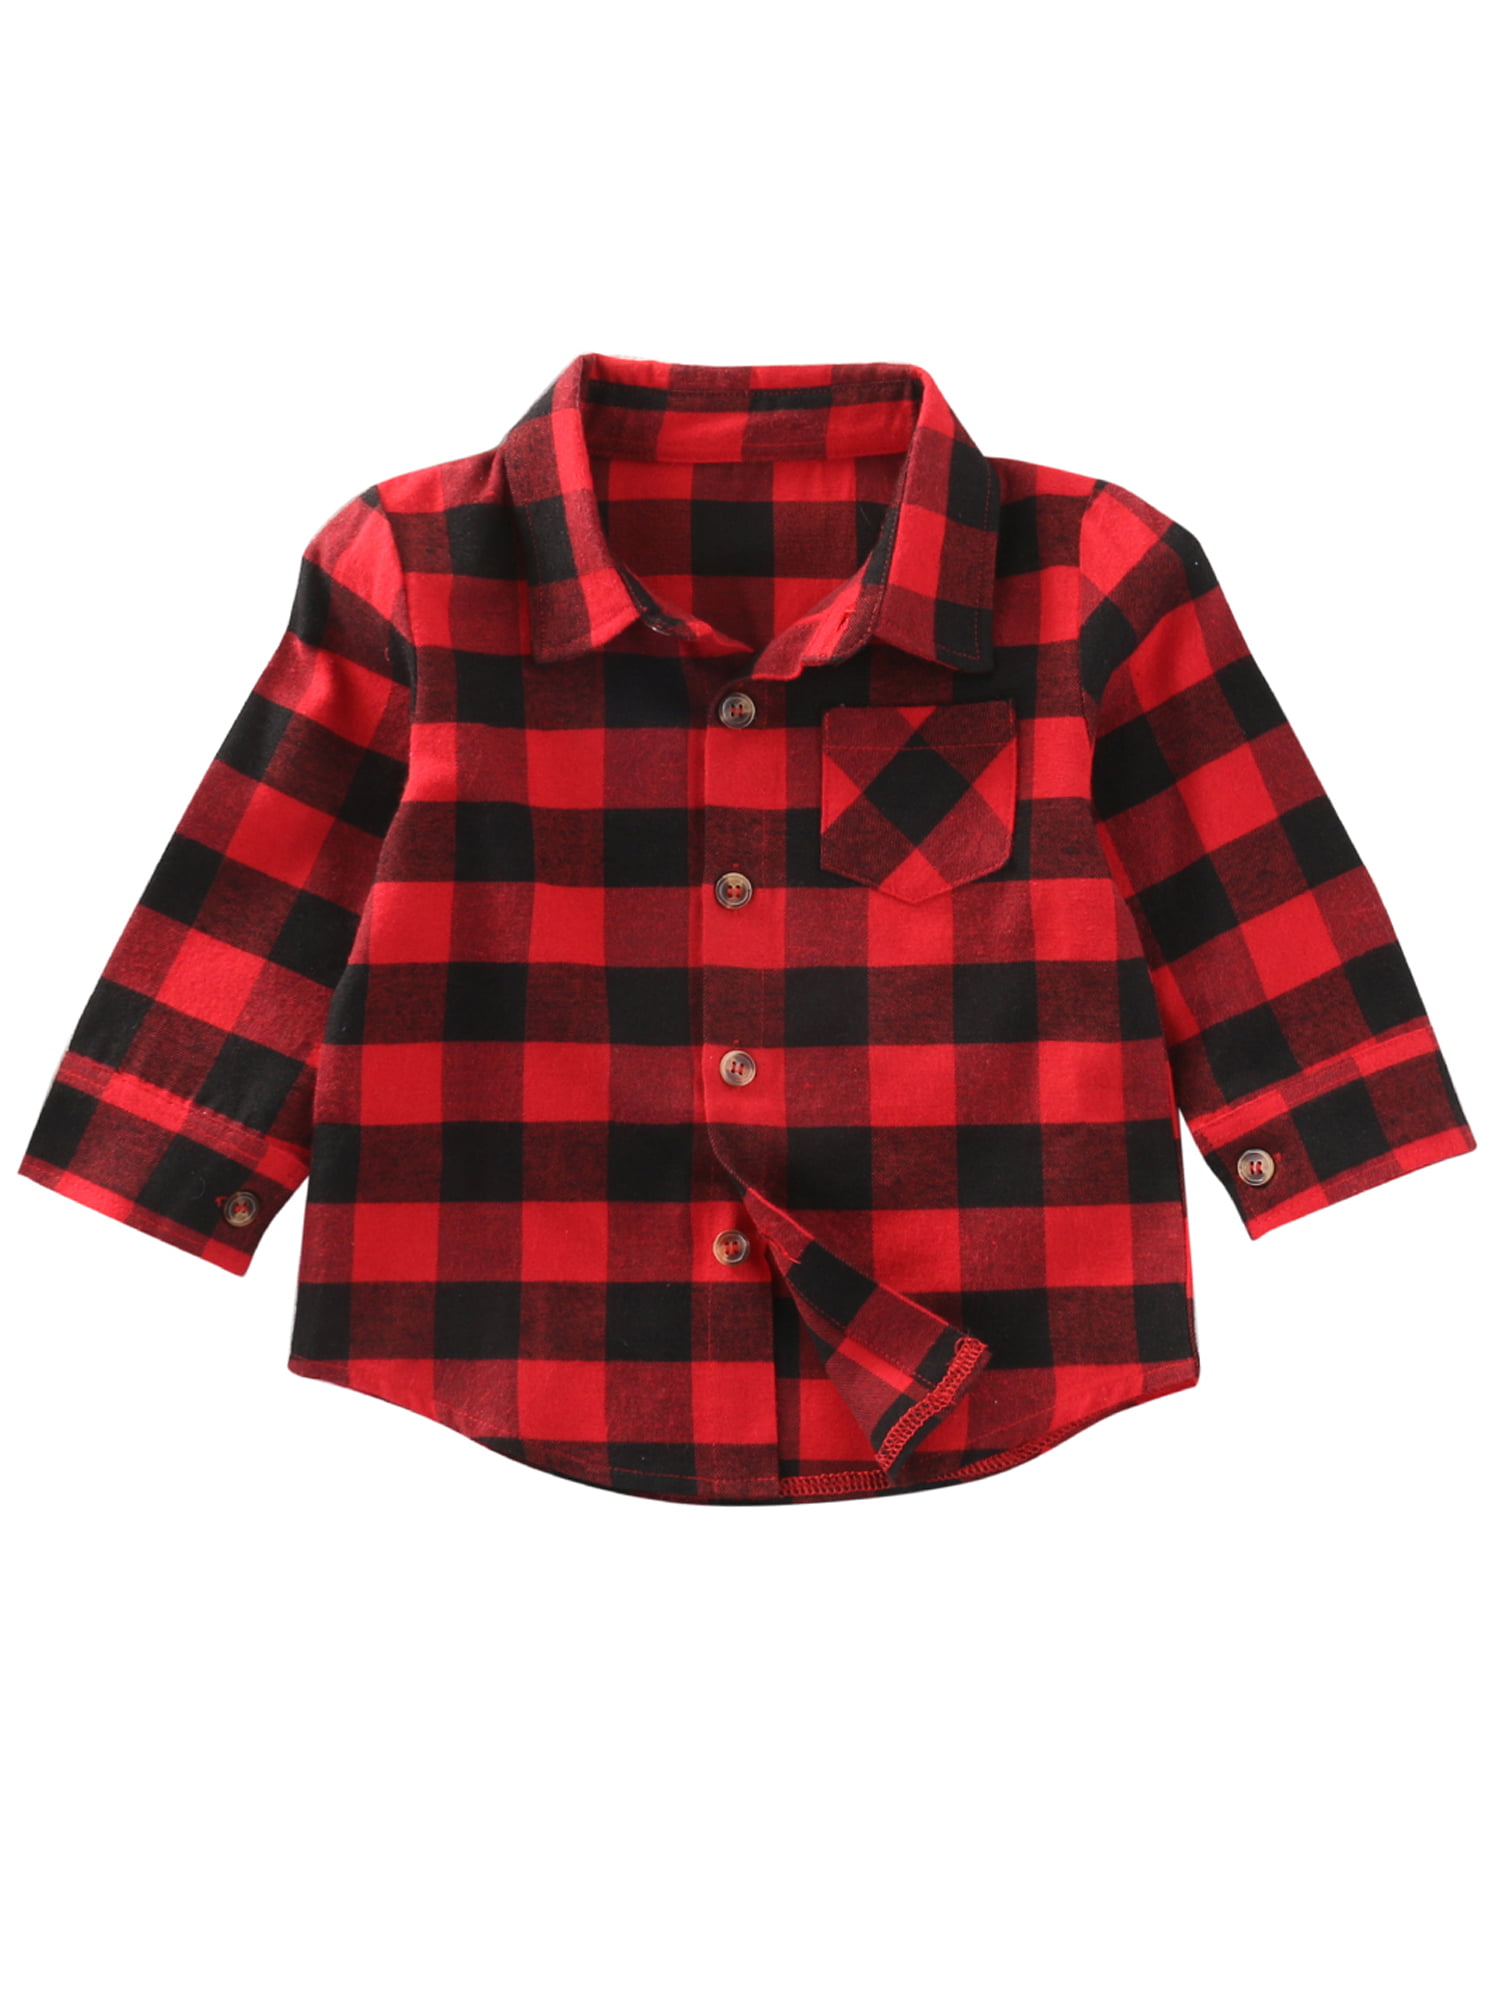 Kids Little Boys Girls Baby Letters Print Long Sleeve Button Down Red Plaid Flannel Shirt 